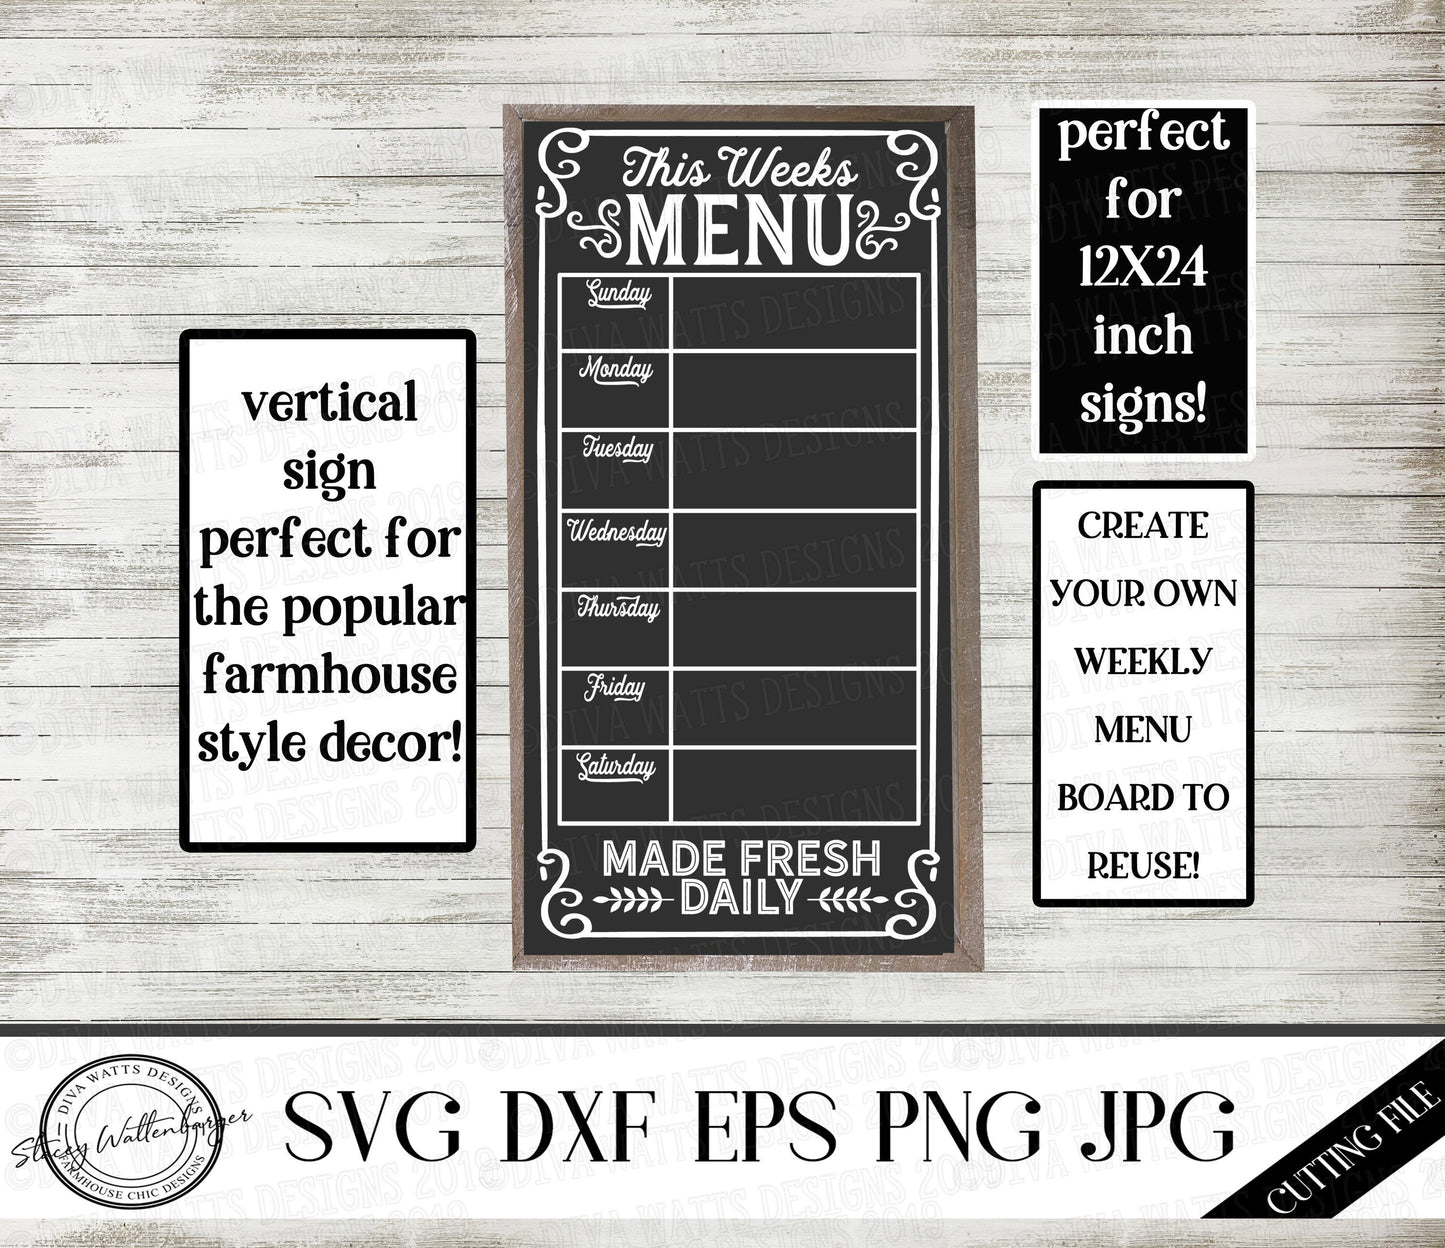 SVG Weekly Menu | Cutting File | Farmhouse Rustic Vintage Style | Instant Download DXF PNG eps | Custom Meal Plan | Kitchen Sign